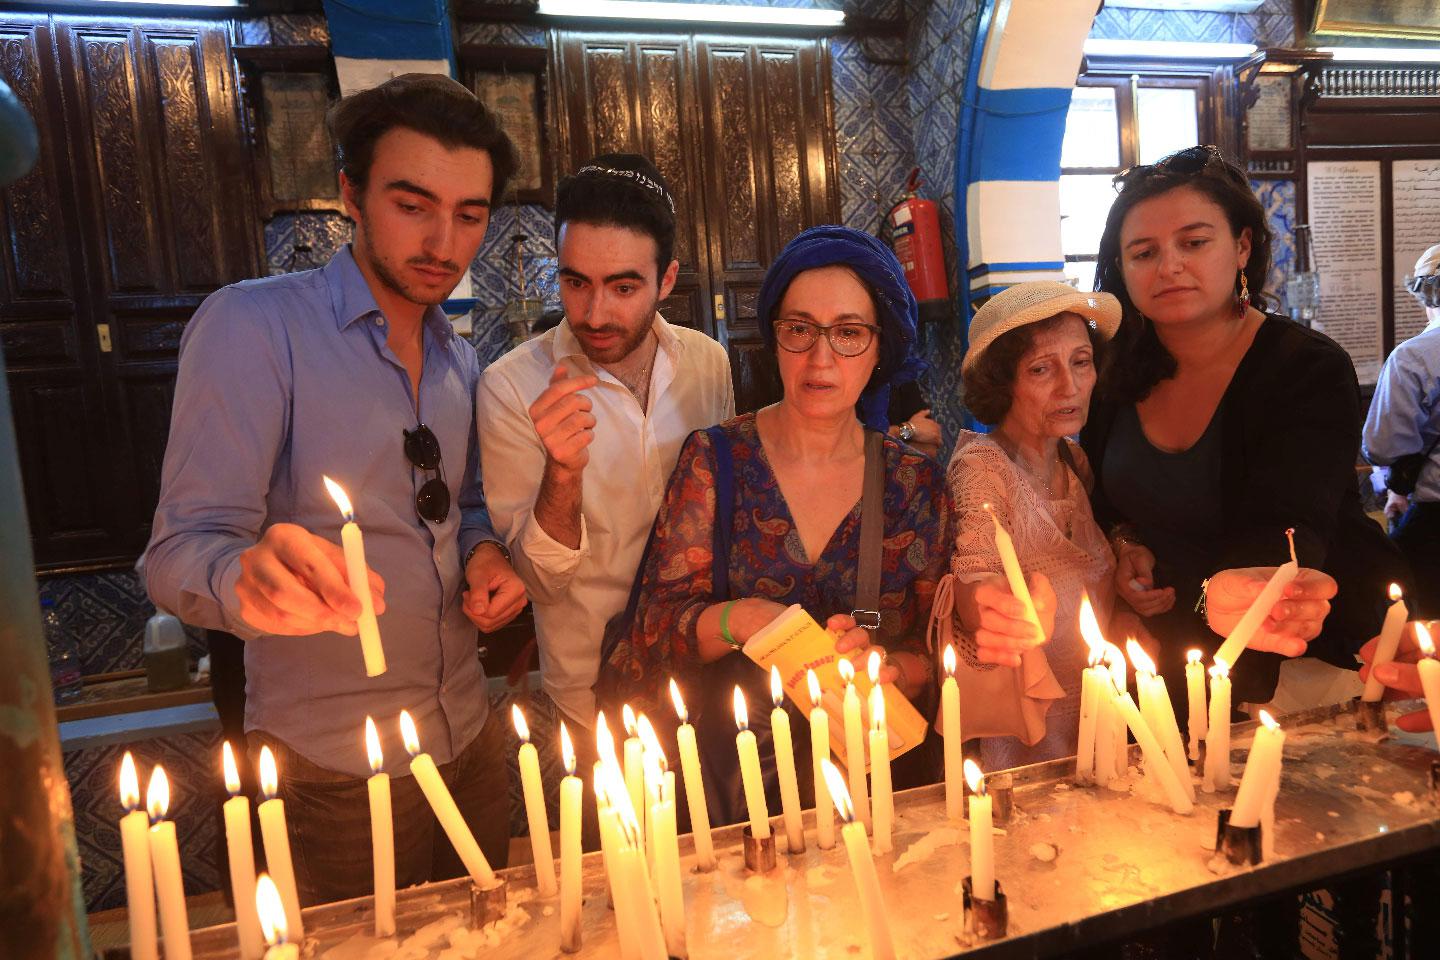 Jewish pilgrims light candles on the first day of the annual pilgrimage to the El Ghriba Synagogue